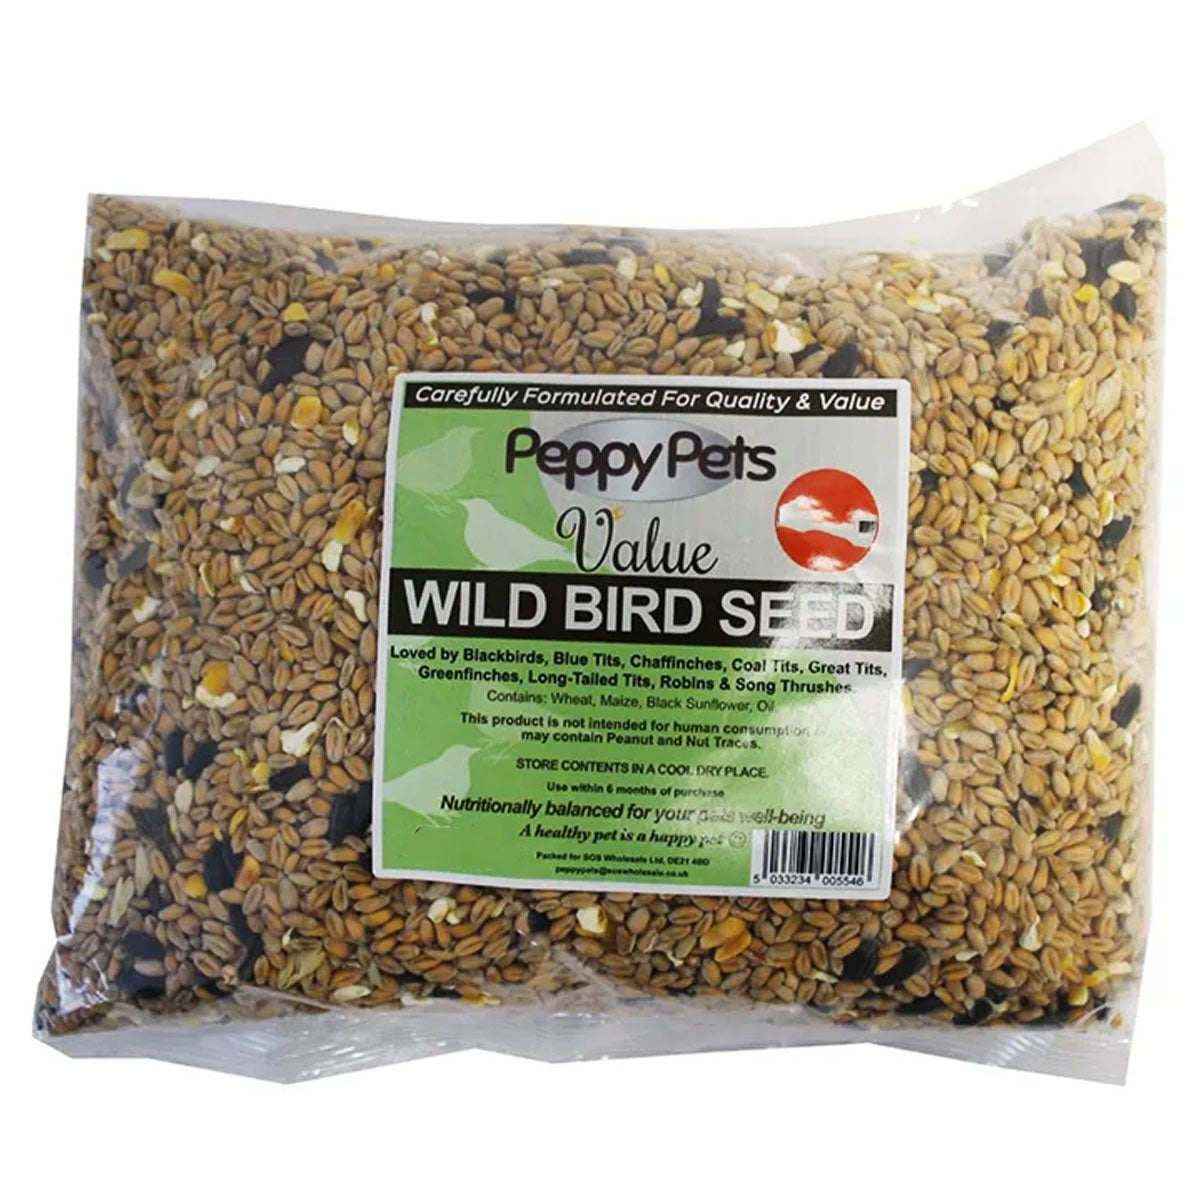 A bag of Peppy Pets - Wild Bird Seeds Feed - 700g.